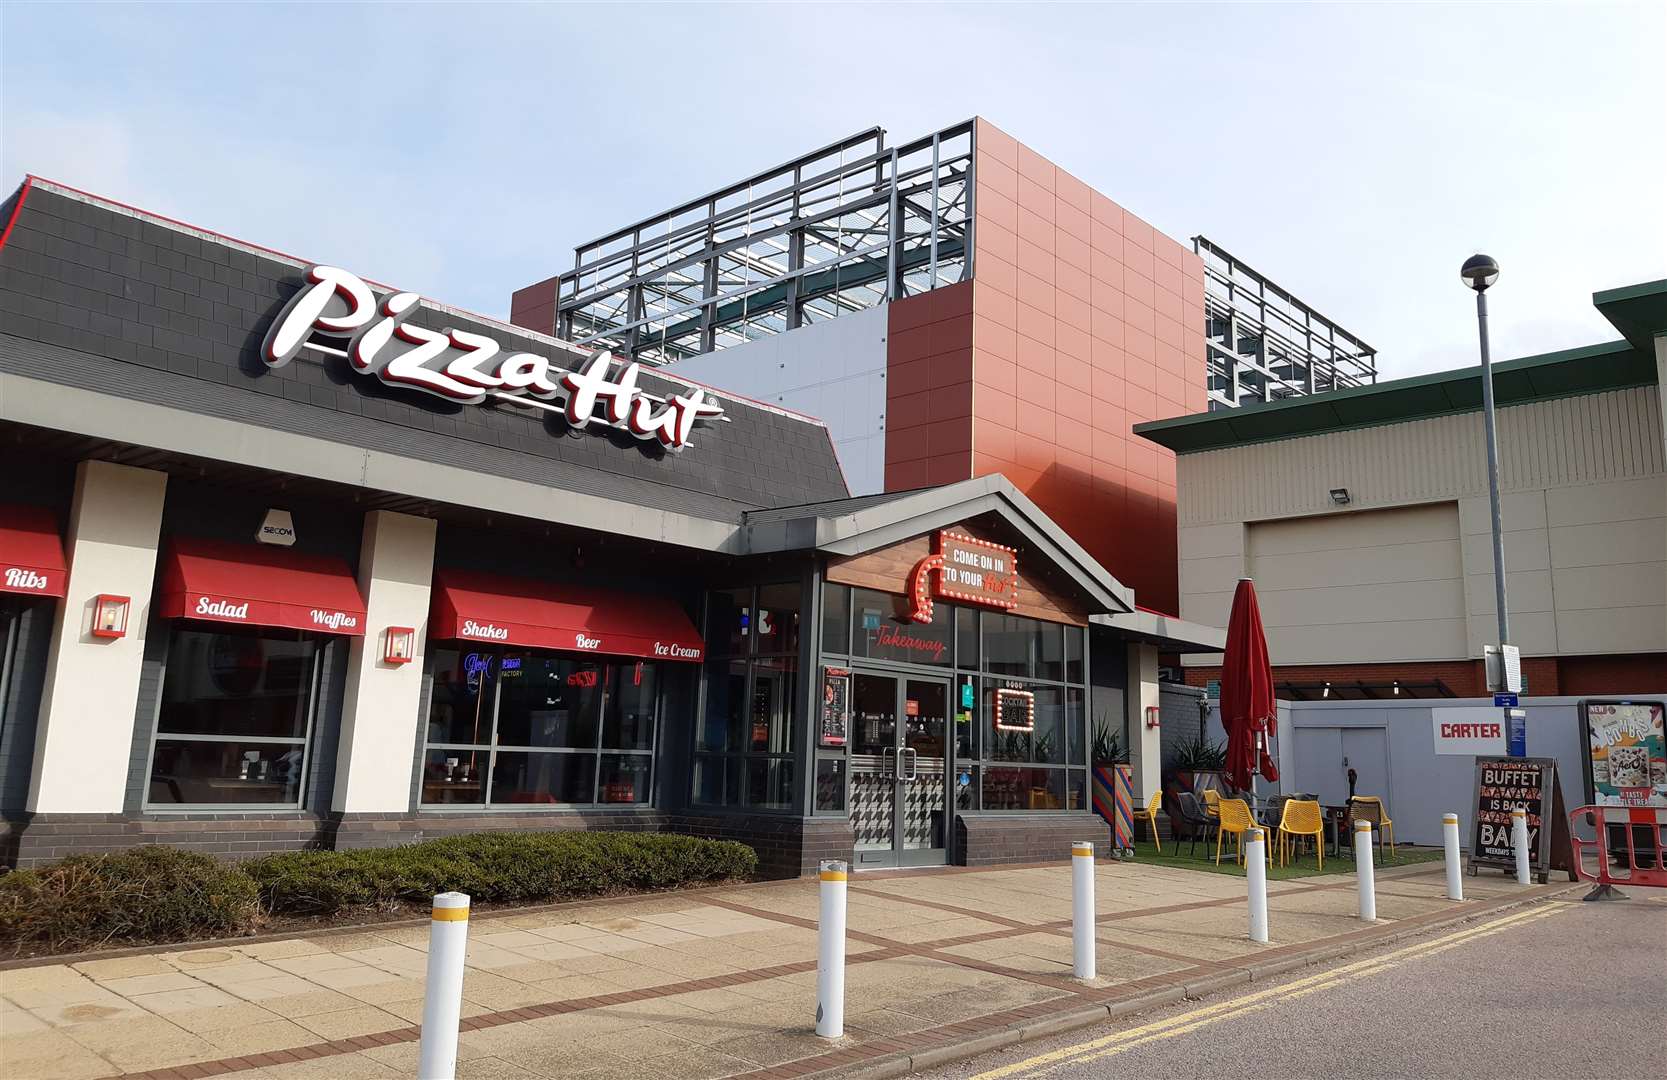 The new extension towers over Pizza Hut